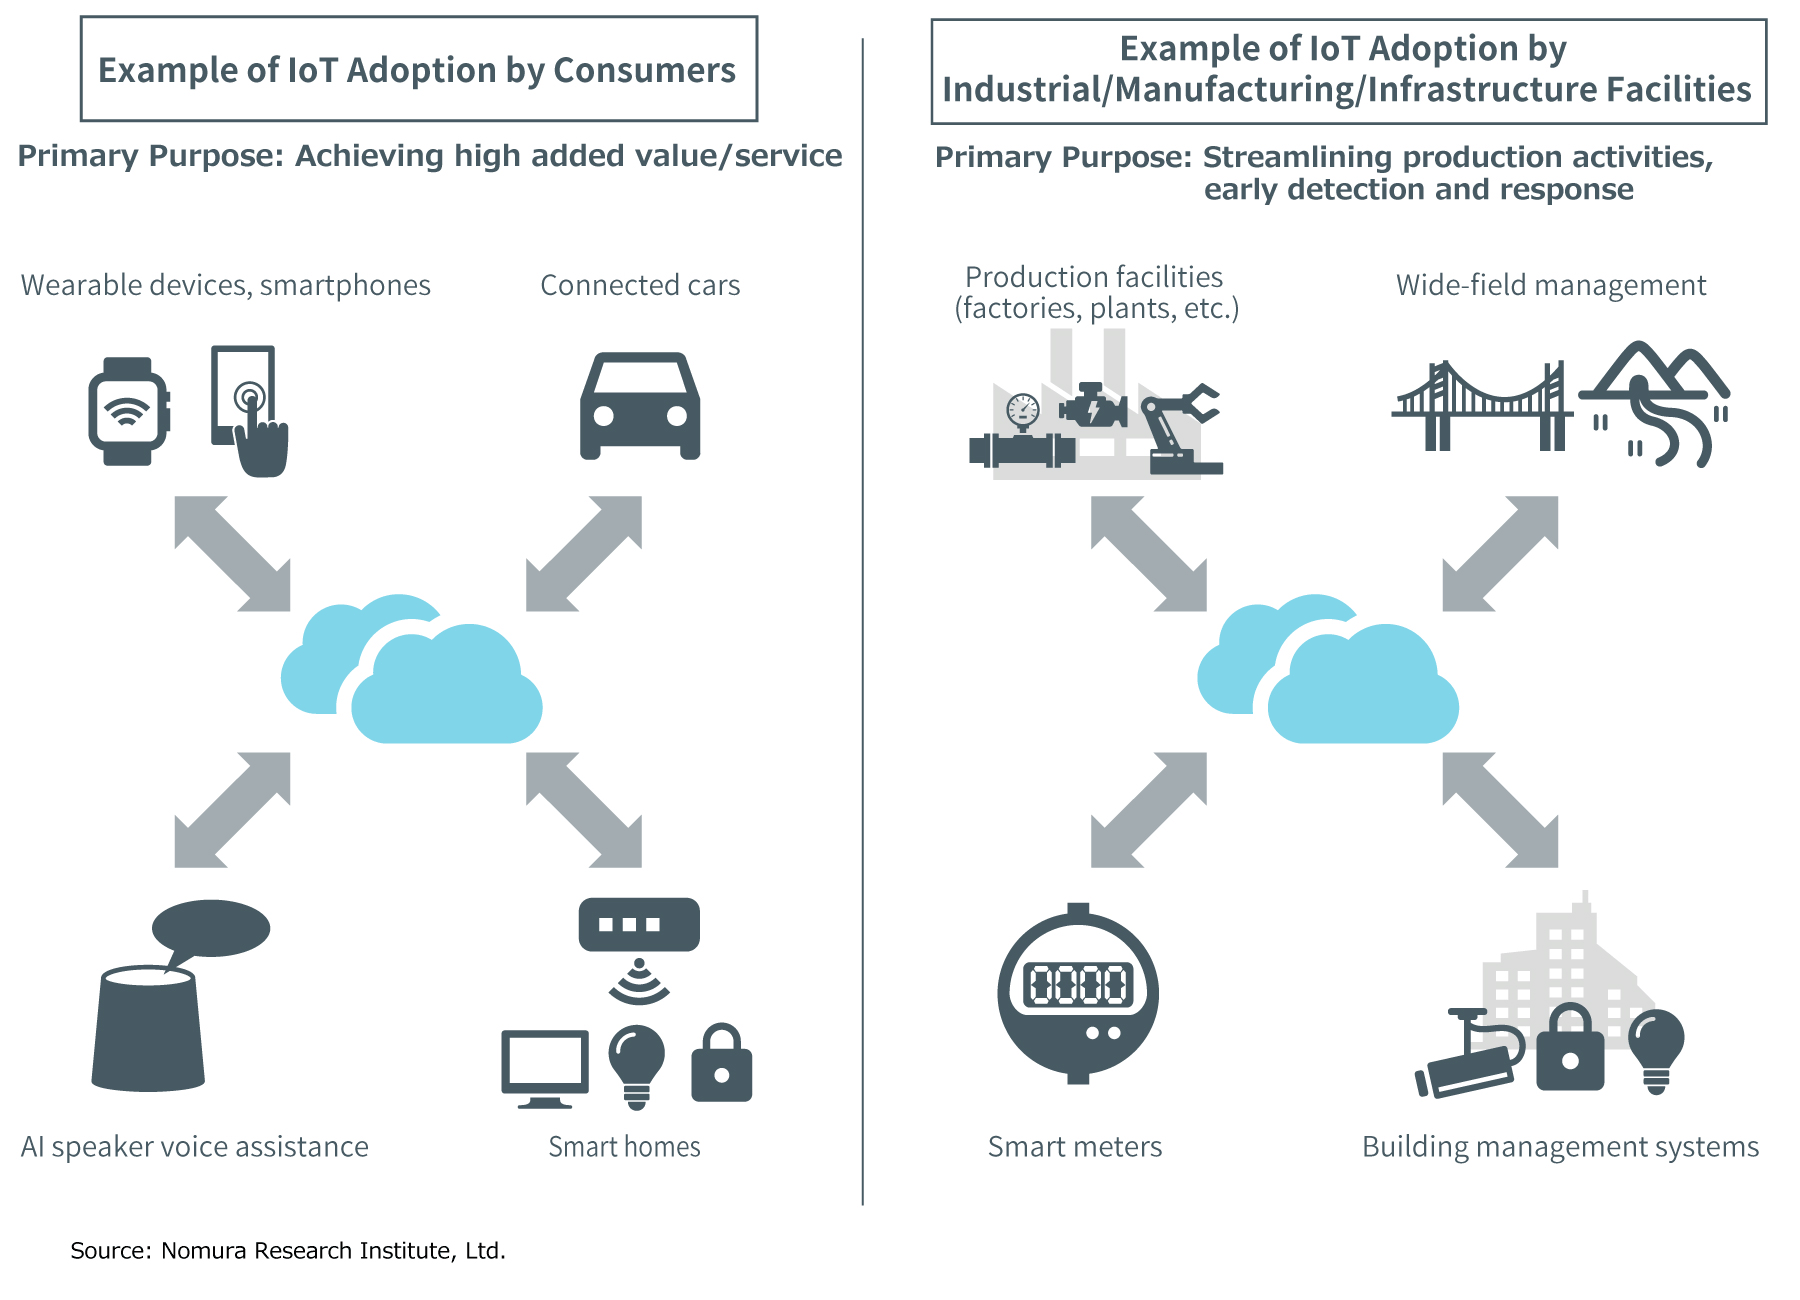 Examples of IoT for General Consumers and IoT for Industrial/Manufacturing/Infrastructure Facilities